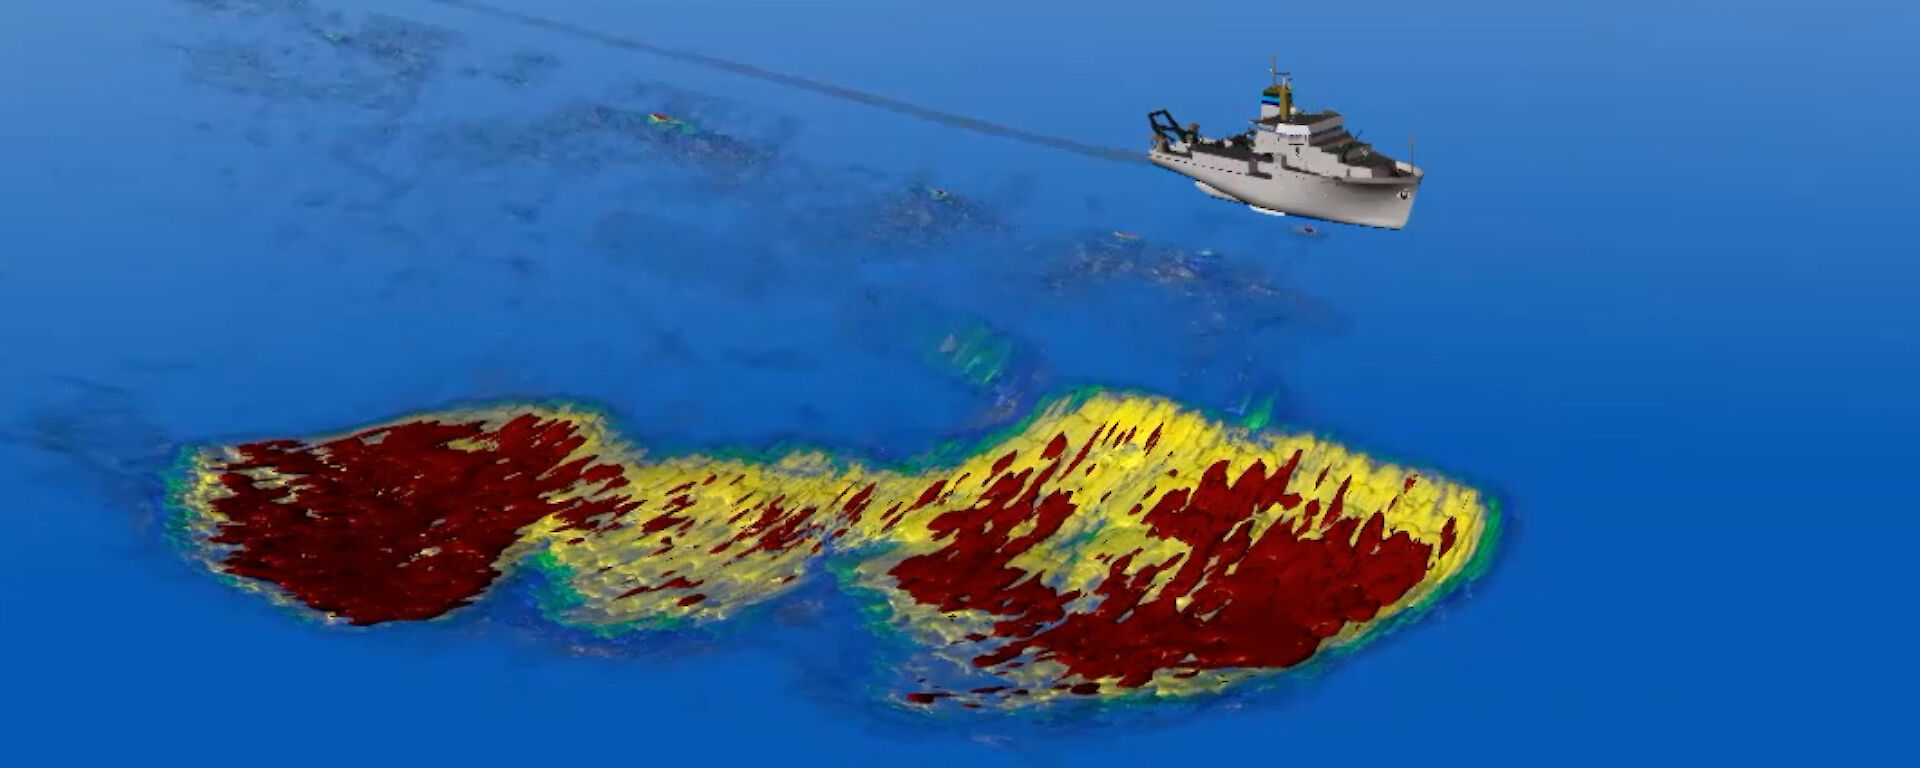 A giant krill swam visualised through the ship’s acoustic sensors.